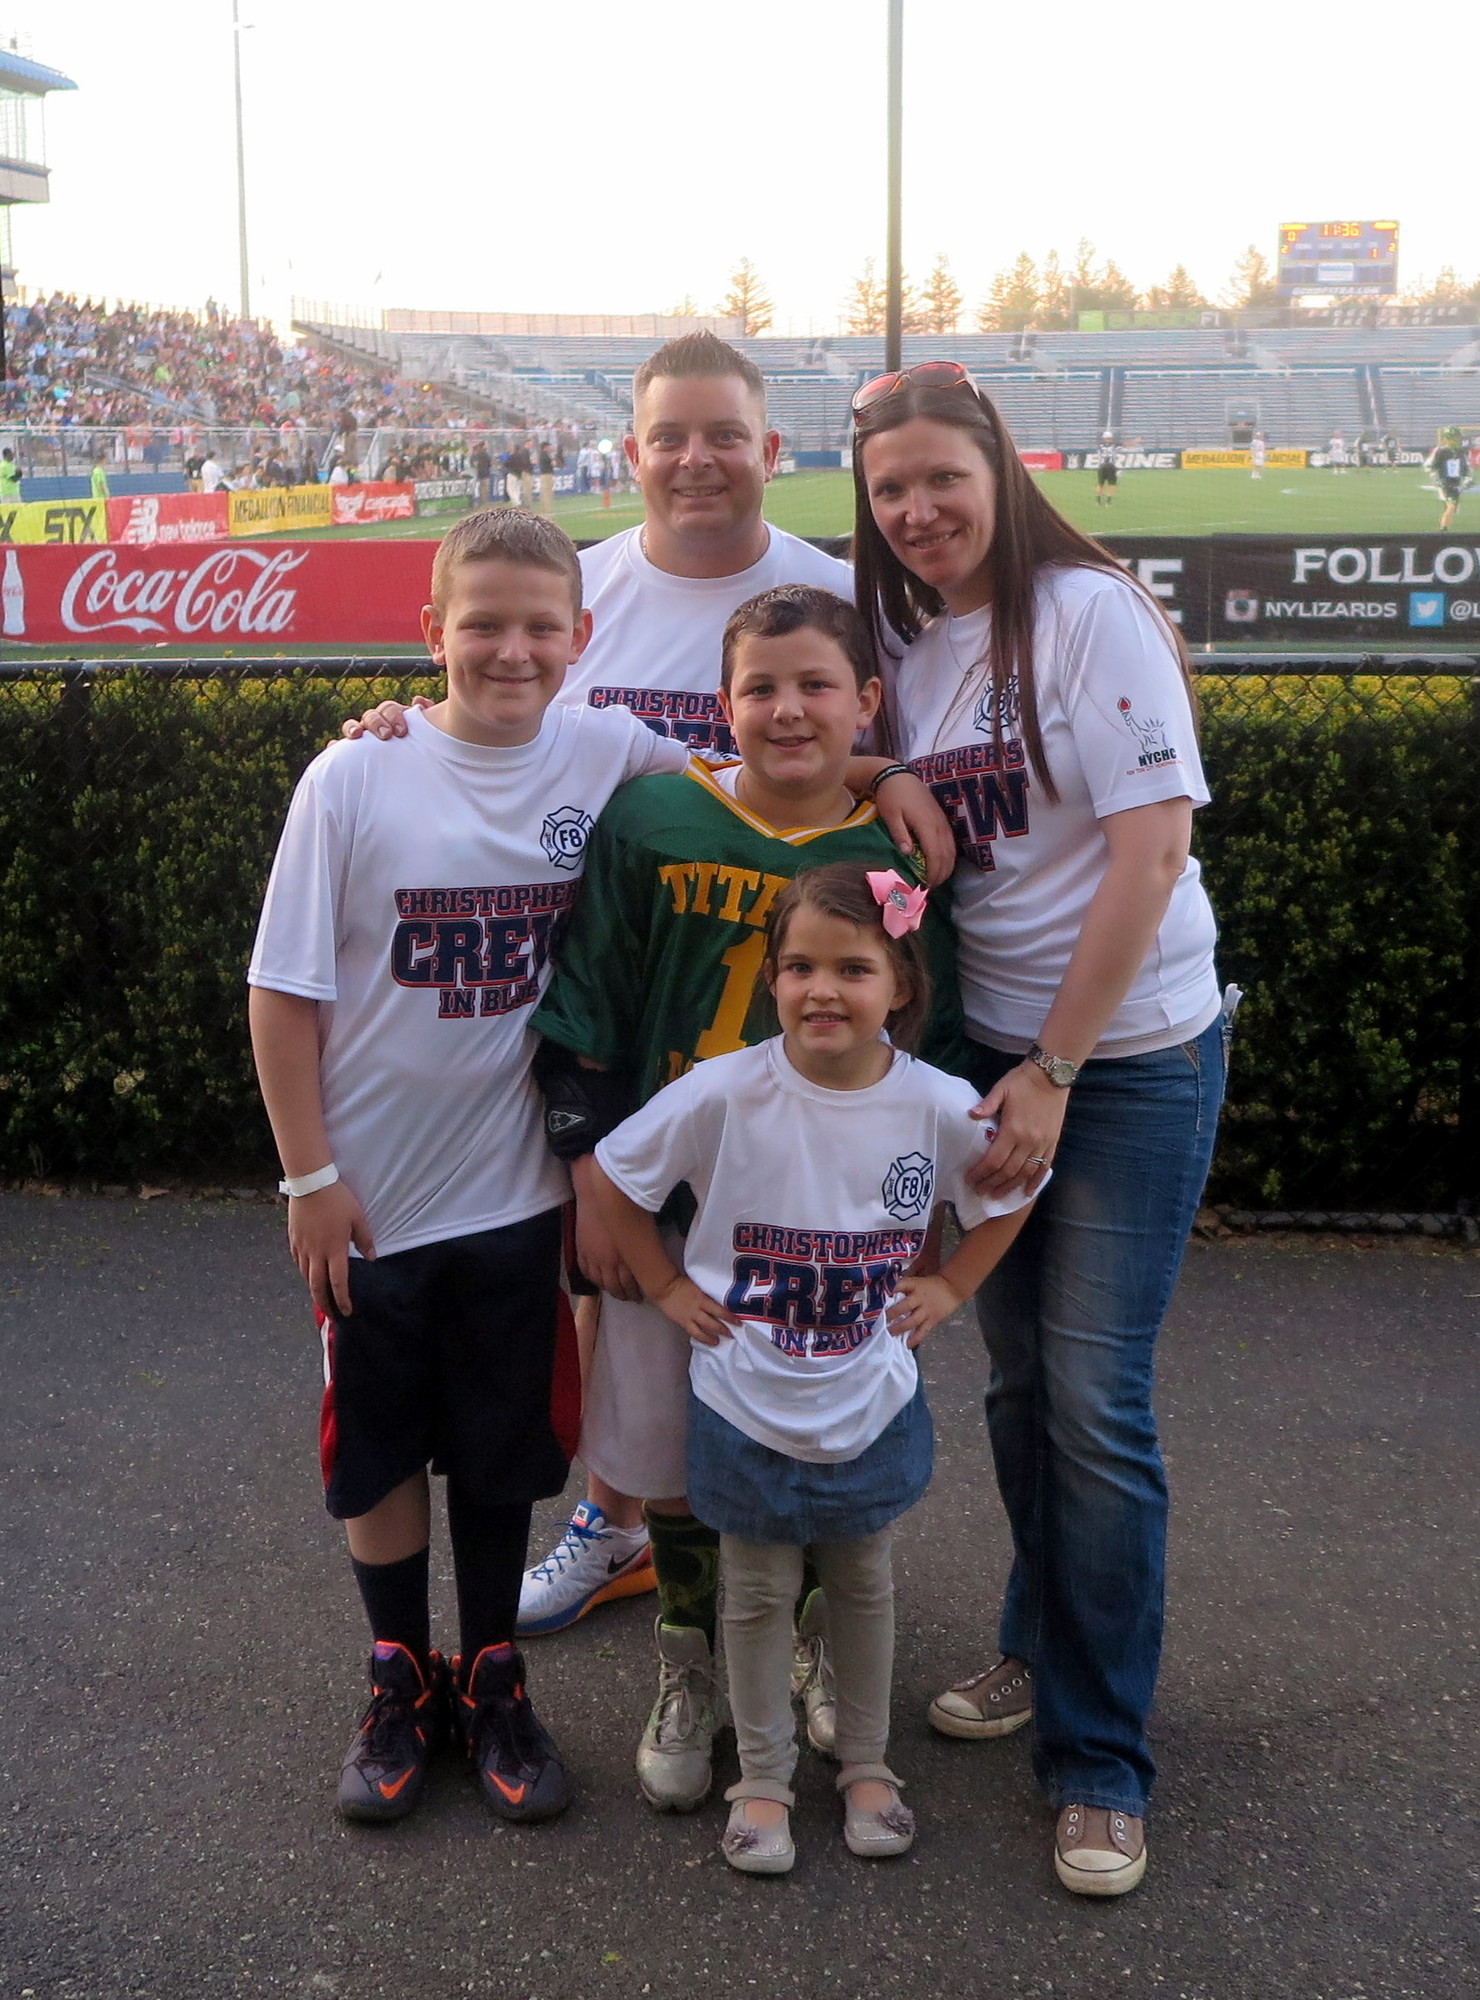 The Ambrosio family, Danny, Kelly, Christopher, Connor and Kelsey, have raised more than $30,000 in support of hemophilia research.